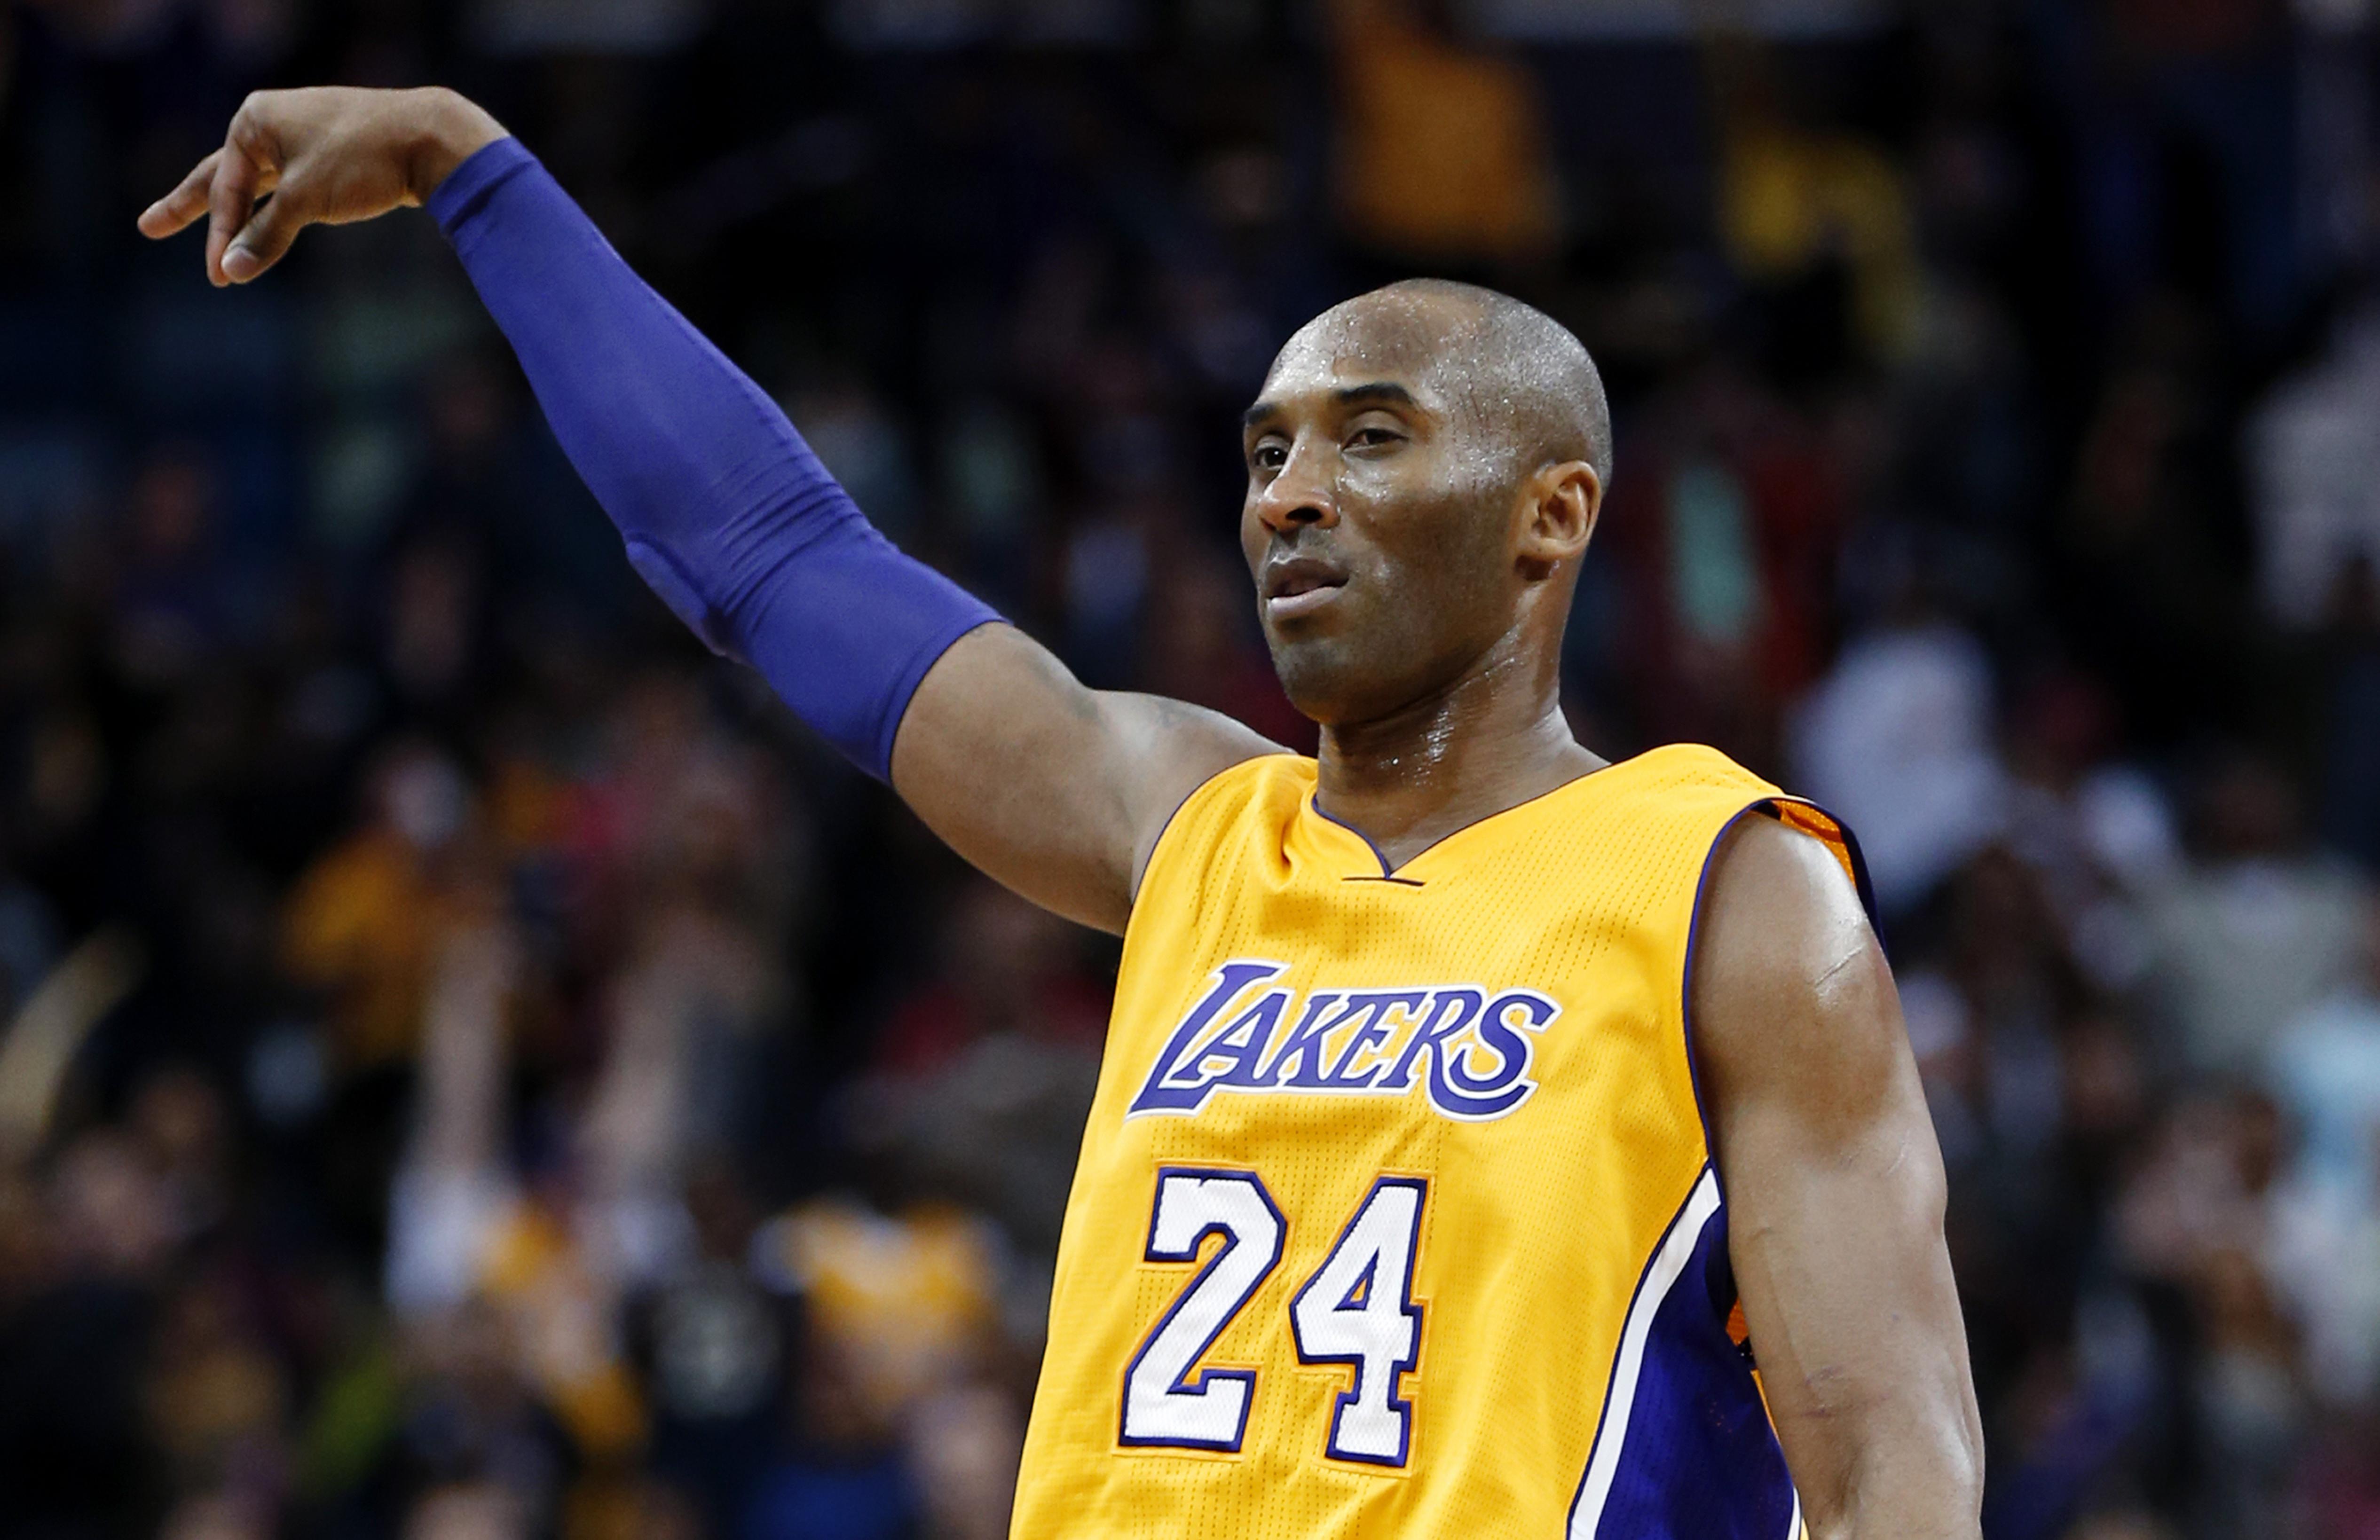 when will the lakers retire kobe's jersey